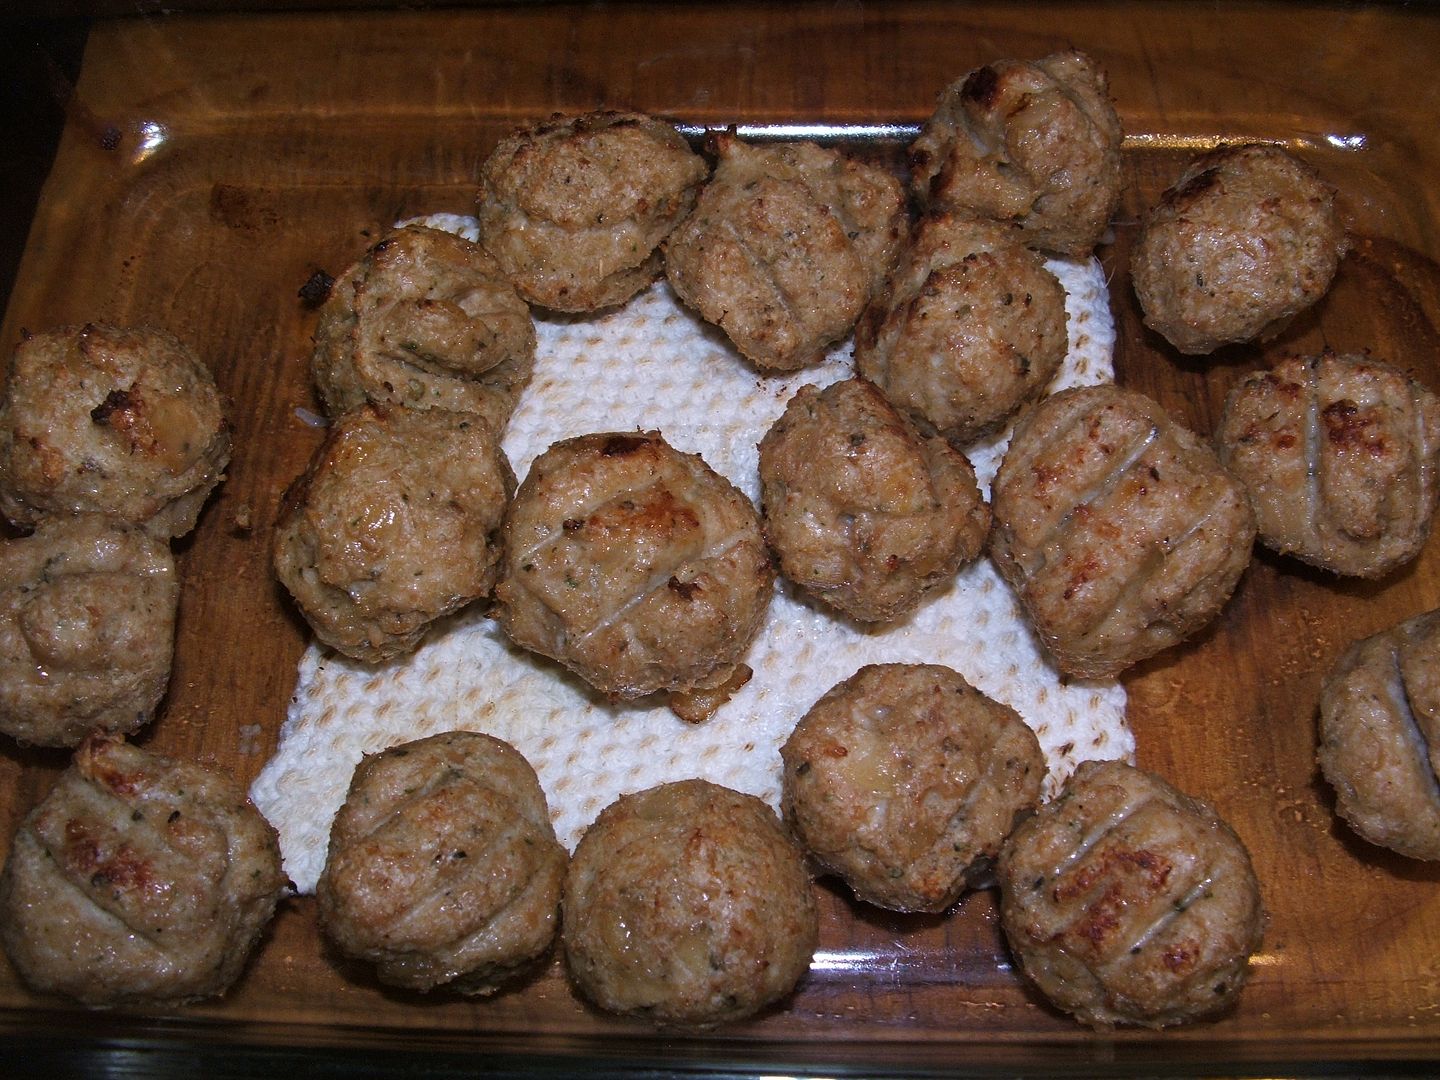 Caramelized Onion Chicken Meatballs by Angie Ouellette-Tower for godsgrowinggarden.com photo 011_zps46a1c4b8.jpg